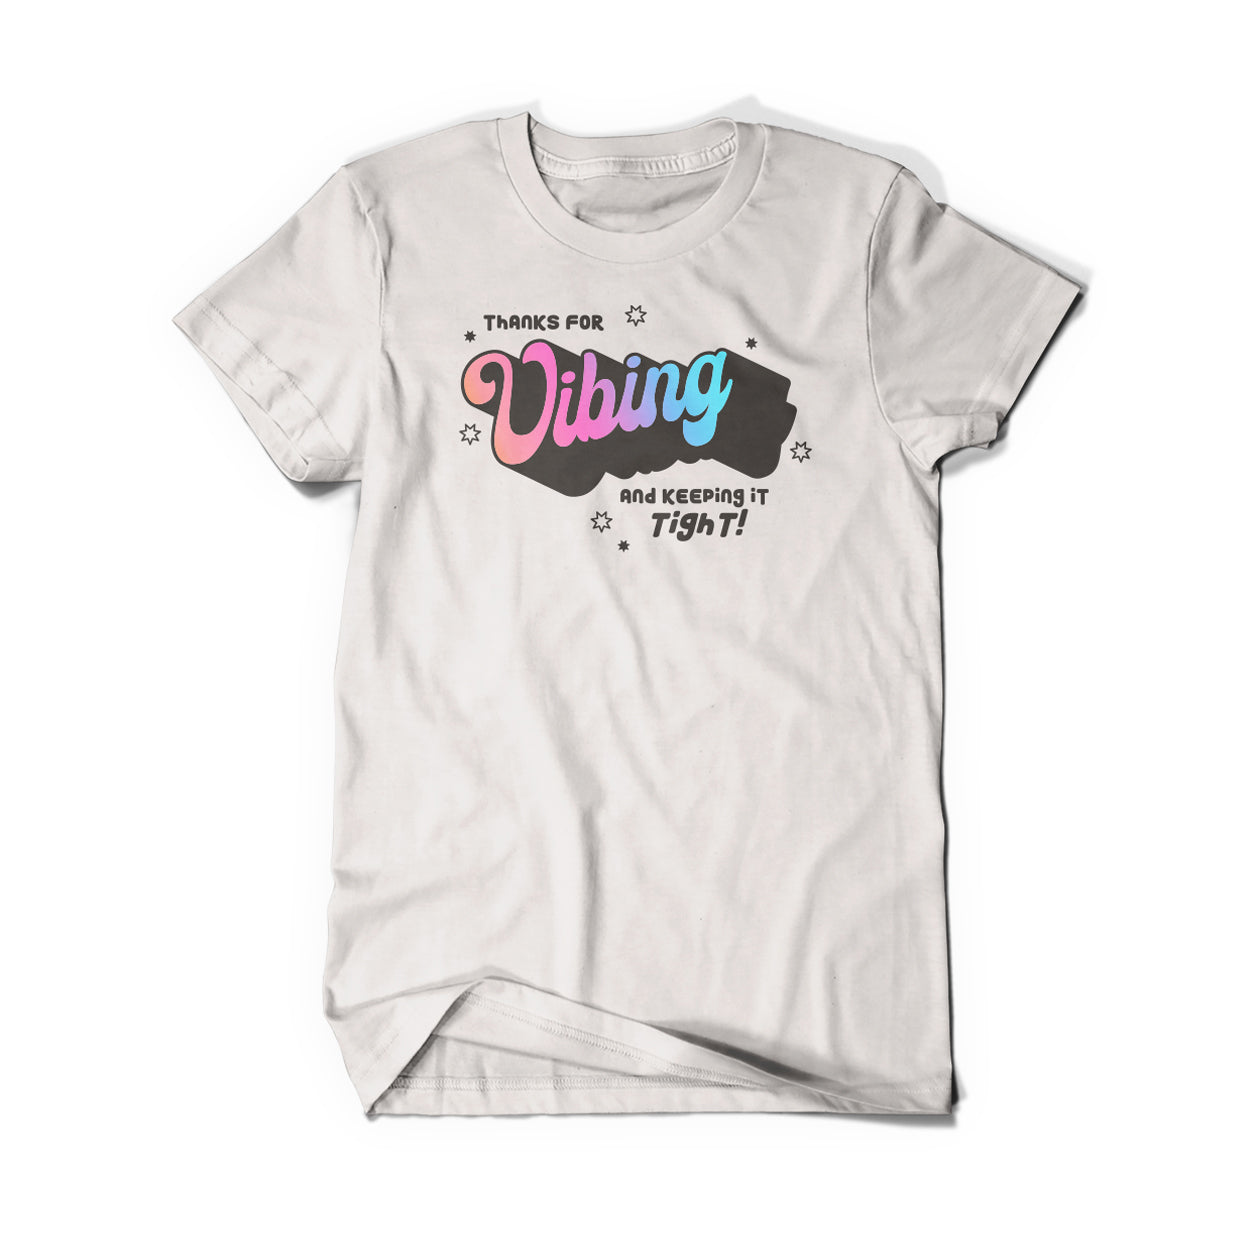 A cream shirt that says, "Thanks for vibing and keeping it tight!" The "vibing" is a pastel gradient in a large retro handwritten font.